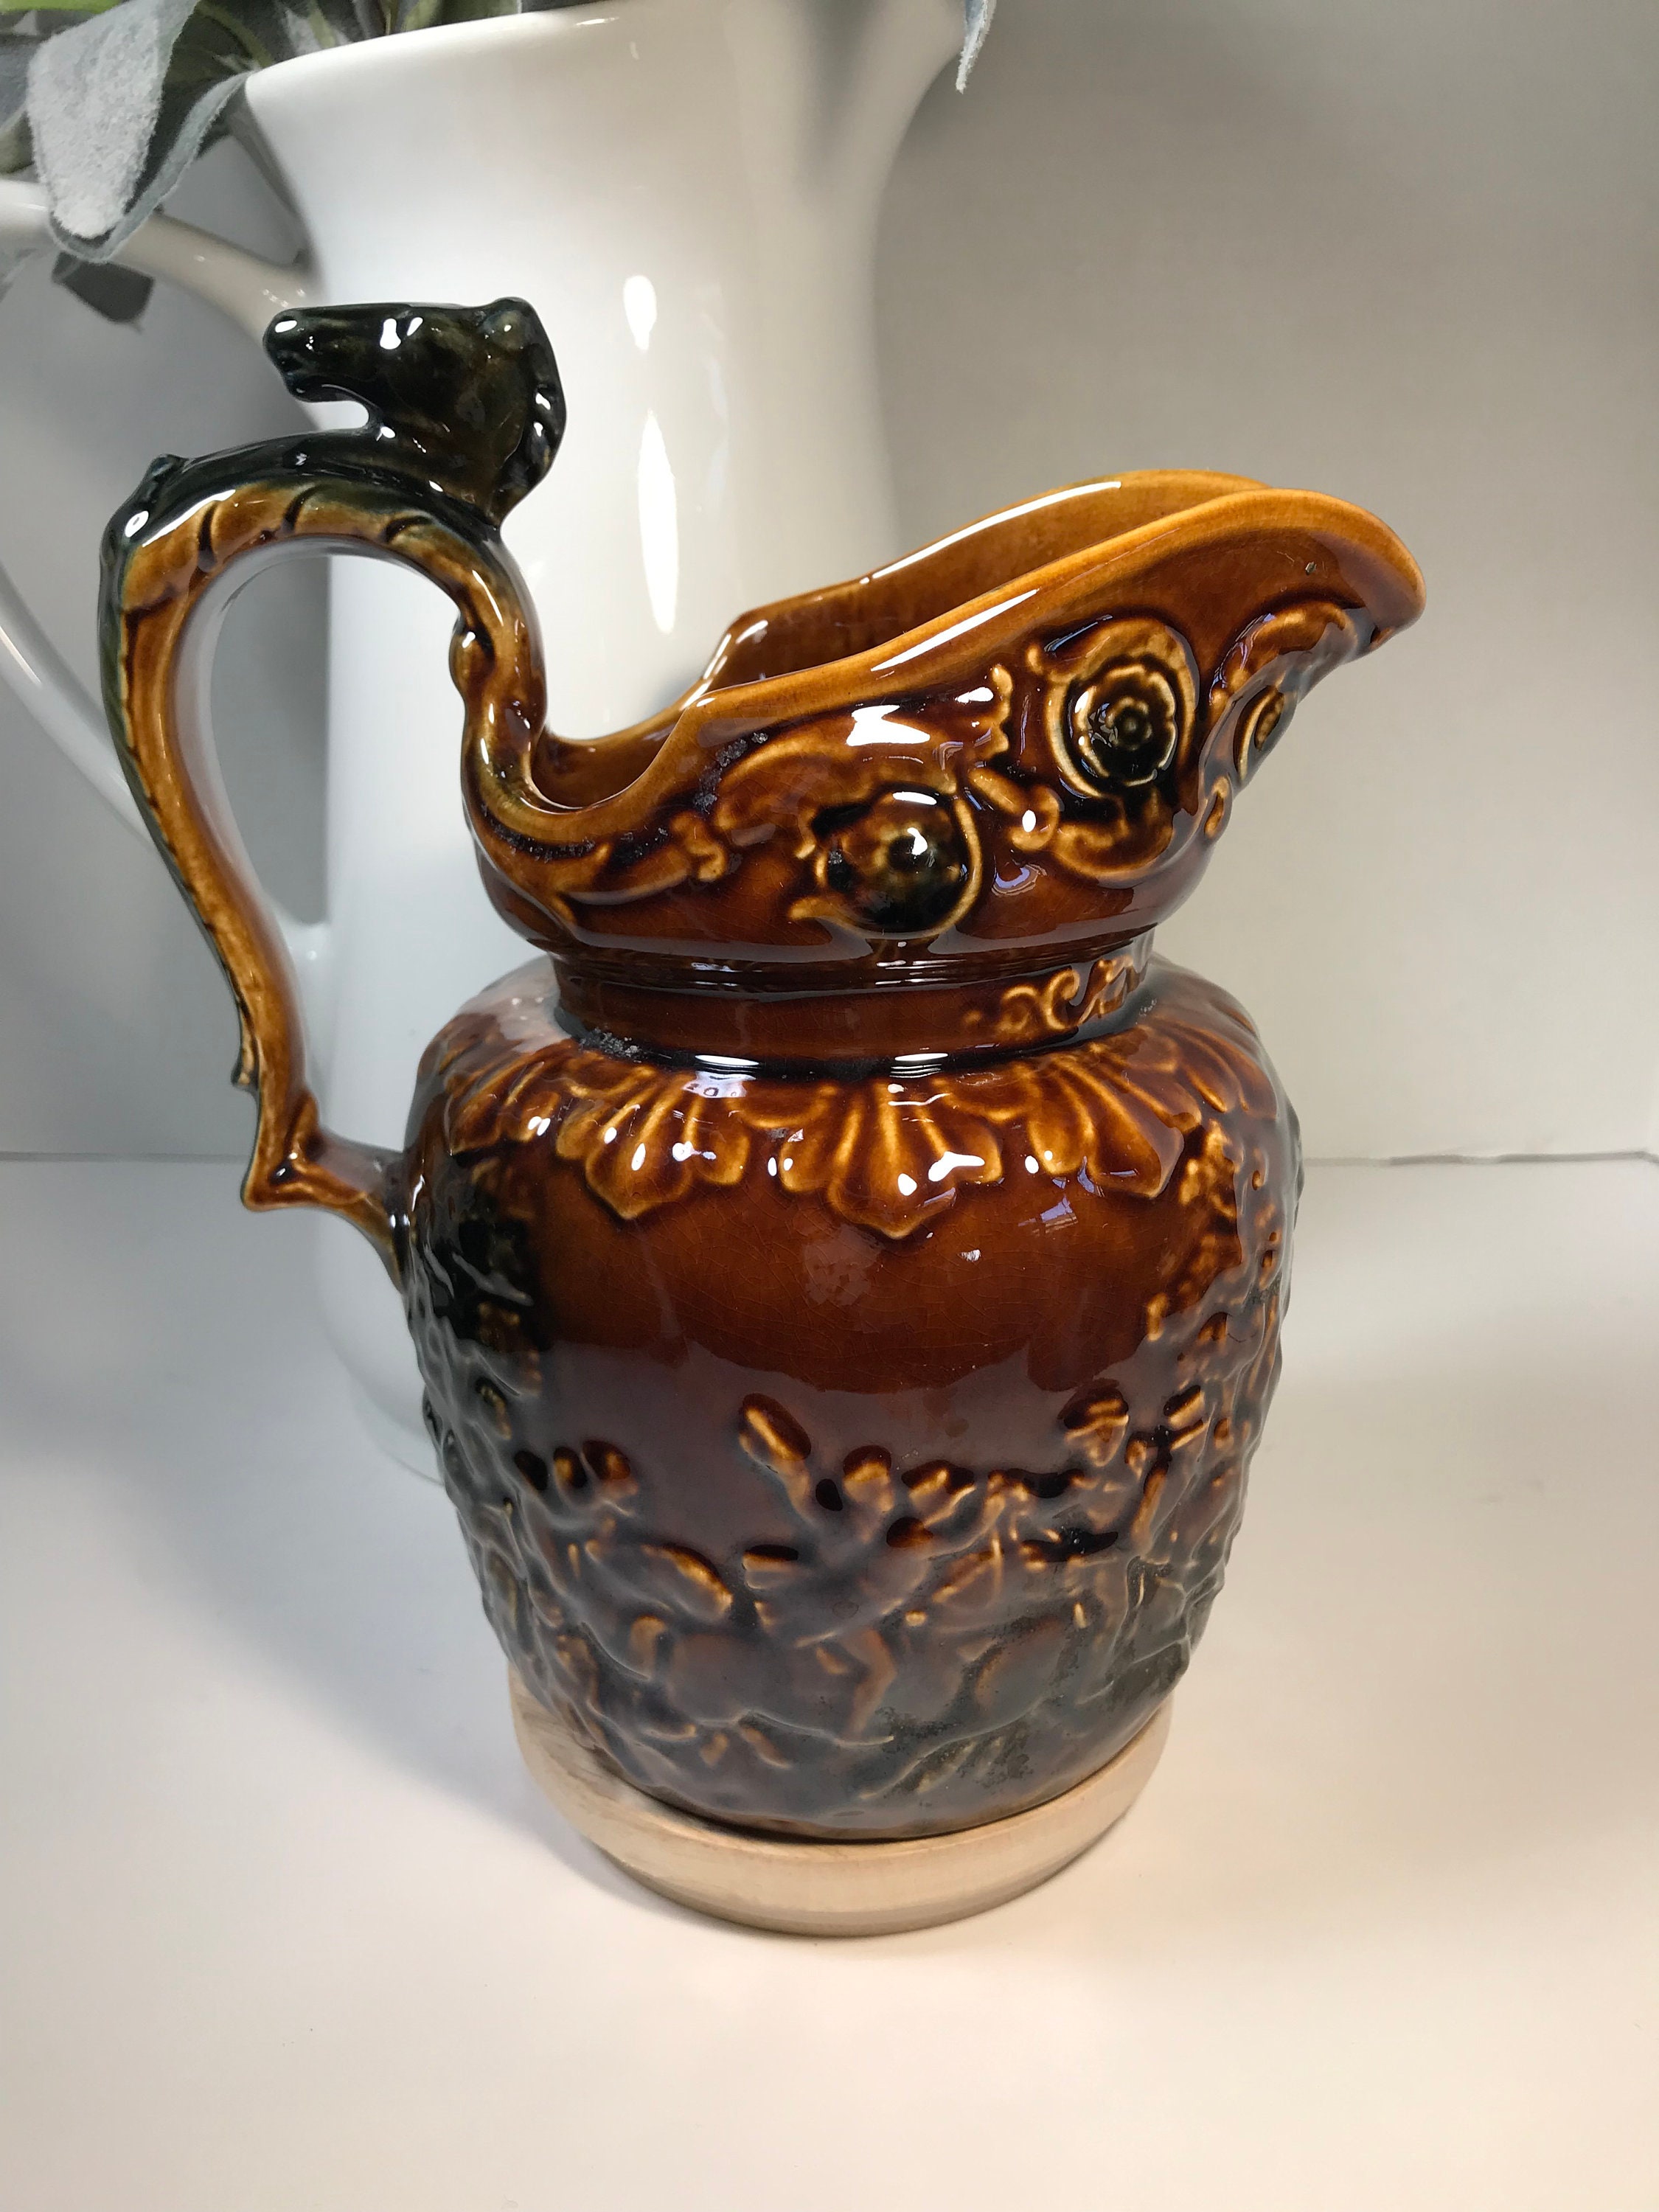 Wood and Sons Ltd., England. Small pitcher. Juan Circa 1930's. – With A Past